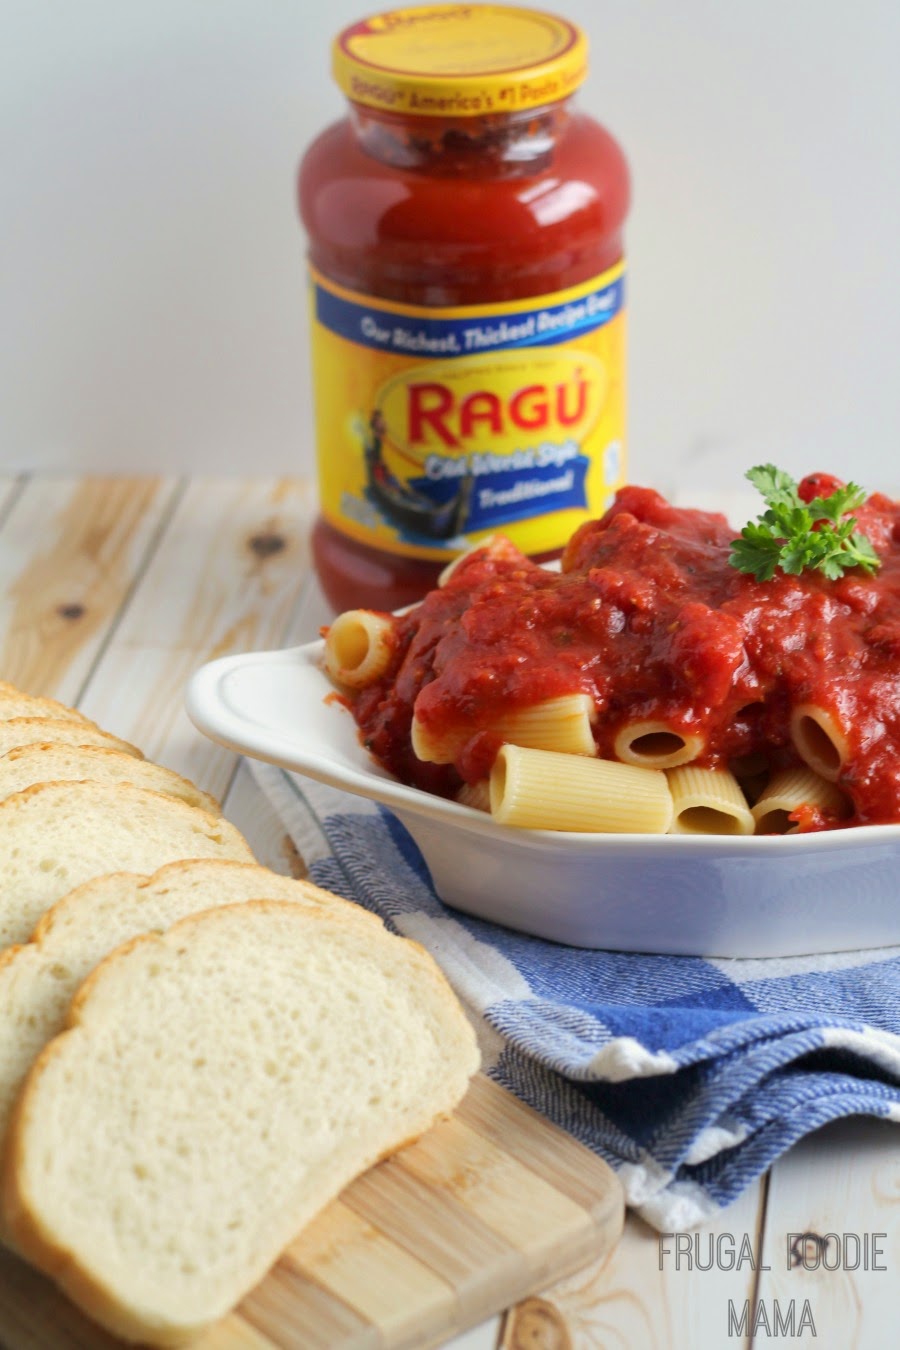 Ragú is recognizing and celebrating everything that makes family mealtime Saucesome. From unique recipes to silly moments to crazy weeknights…it's all #Saucesome with the delicious help of Ragú Sauce. #ad